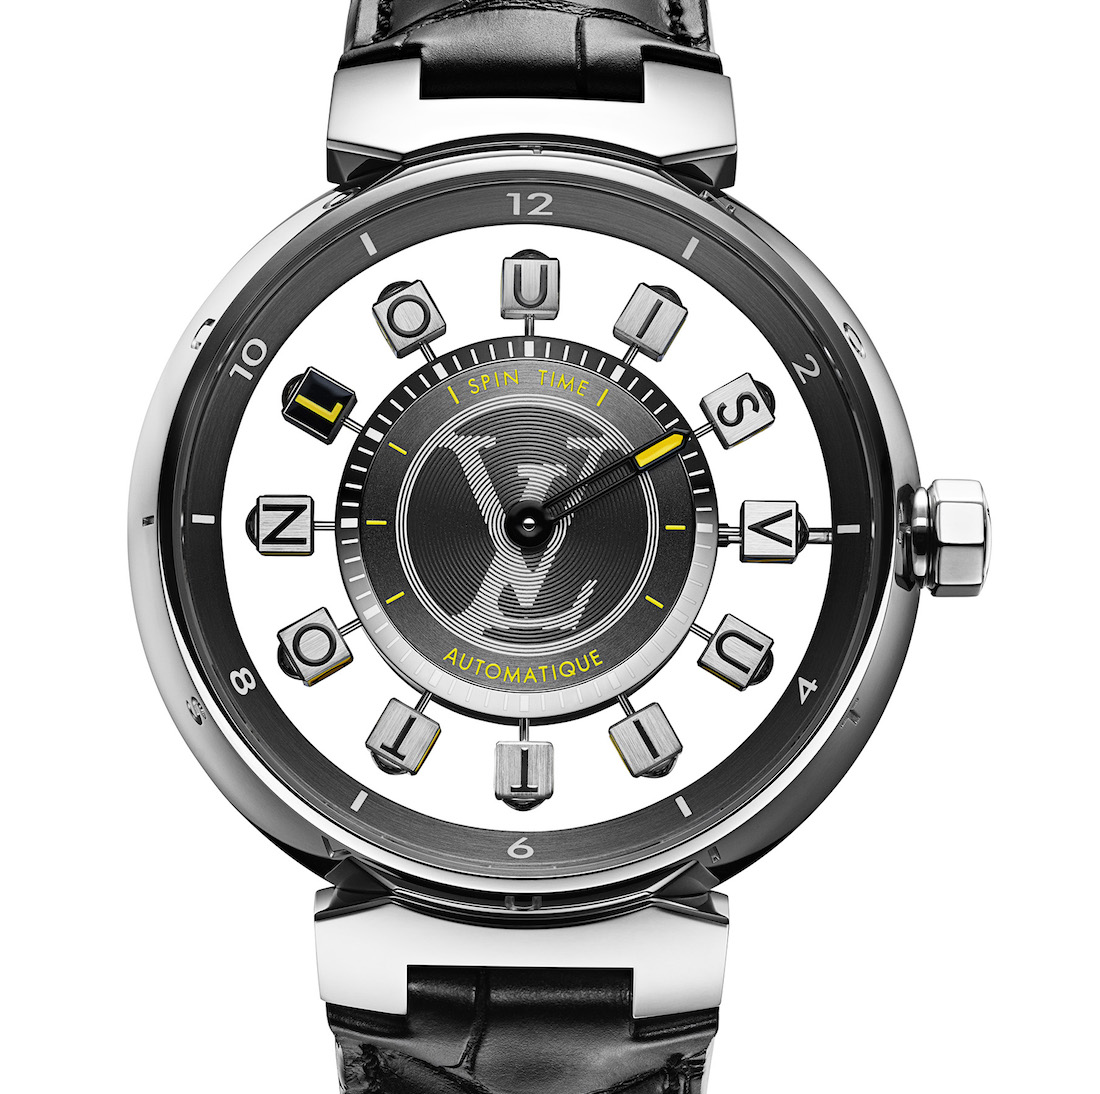 Watch Louis Vuitton Tambour Spin Time Régate Titane  Tambour Spin Time  Titanium - Alligator and Rubber Strap